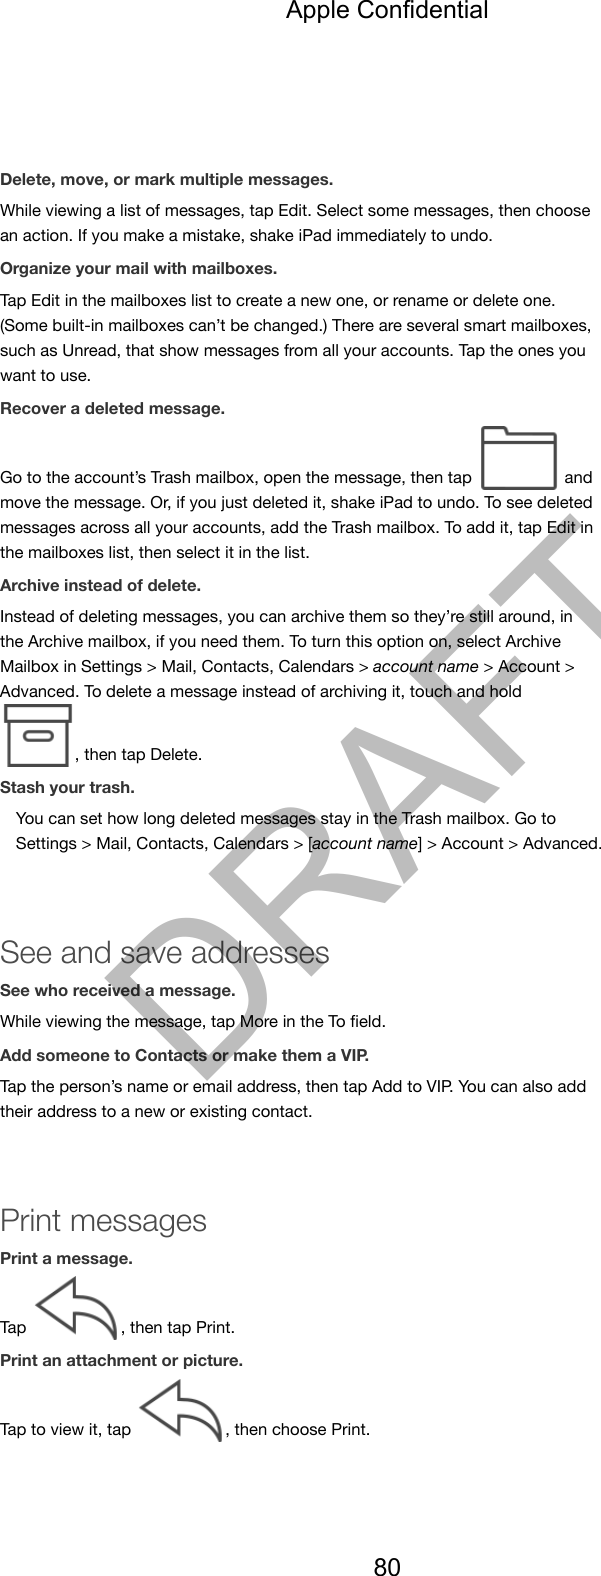 Delete, move, or mark multiple messages.While viewing a list of messages, tap Edit. Select some messages, then choosean action. If you make a mistake, shake iPad immediately to undo.Organize your mail with mailboxes.Tap Edit in the mailboxes list to create a new one, or rename or delete one.(Some built-in mailboxes can’t be changed.) There are several smart mailboxes,such as Unread, that show messages from all your accounts. Tap the ones youwant to use.Recover a deleted message.Go to the account’s Trash mailbox, open the message, then tap   andmove the message. Or, if you just deleted it, shake iPad to undo. To see deletedmessages across all your accounts, add the Trash mailbox. To add it, tap Edit inthe mailboxes list, then select it in the list.Archive instead of delete.Instead of deleting messages, you can archive them so they’re still around, inthe Archive mailbox, if you need them. To turn this option on, select ArchiveMailbox in Settings &gt; Mail, Contacts, Calendars &gt; account name &gt; Account &gt;Advanced. To delete a message instead of archiving it, touch and hold , then tap Delete.Stash your trash.You can set how long deleted messages stay in the Trash mailbox. Go toSettings &gt; Mail, Contacts, Calendars &gt; [account name] &gt; Account &gt; Advanced.See and save addressesSee who received a message.While viewing the message, tap More in the To ﬁeld.Add someone to Contacts or make them a VIP.Tap the person’s name or email address, then tap Add to VIP. You can also addtheir address to a new or existing contact.Print messagesPrint a message.Tap  , then tap Print.Print an attachment or picture.Tap to view it, tap  , then choose Print.Apple Confidential80DRAFT